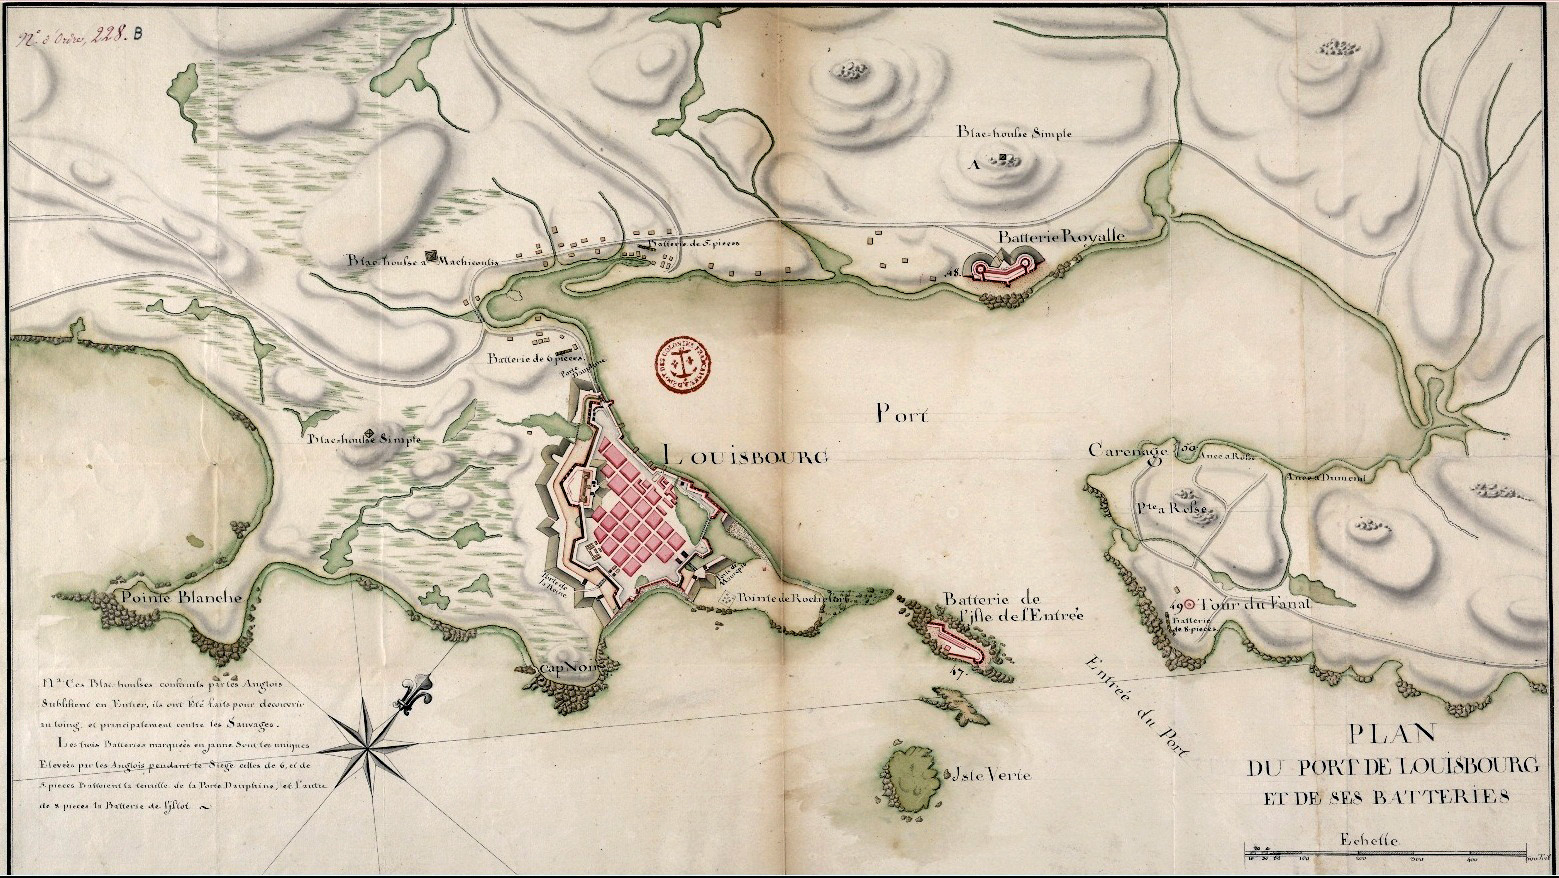 A period map of Louisbourg shows the fortified town at left, the Island Battery at right, and the Royal Battery at top center. If any enemy ships managed to get past the Island Battery, they would still have to contend with the Royal Battery on the north side of the harbor.